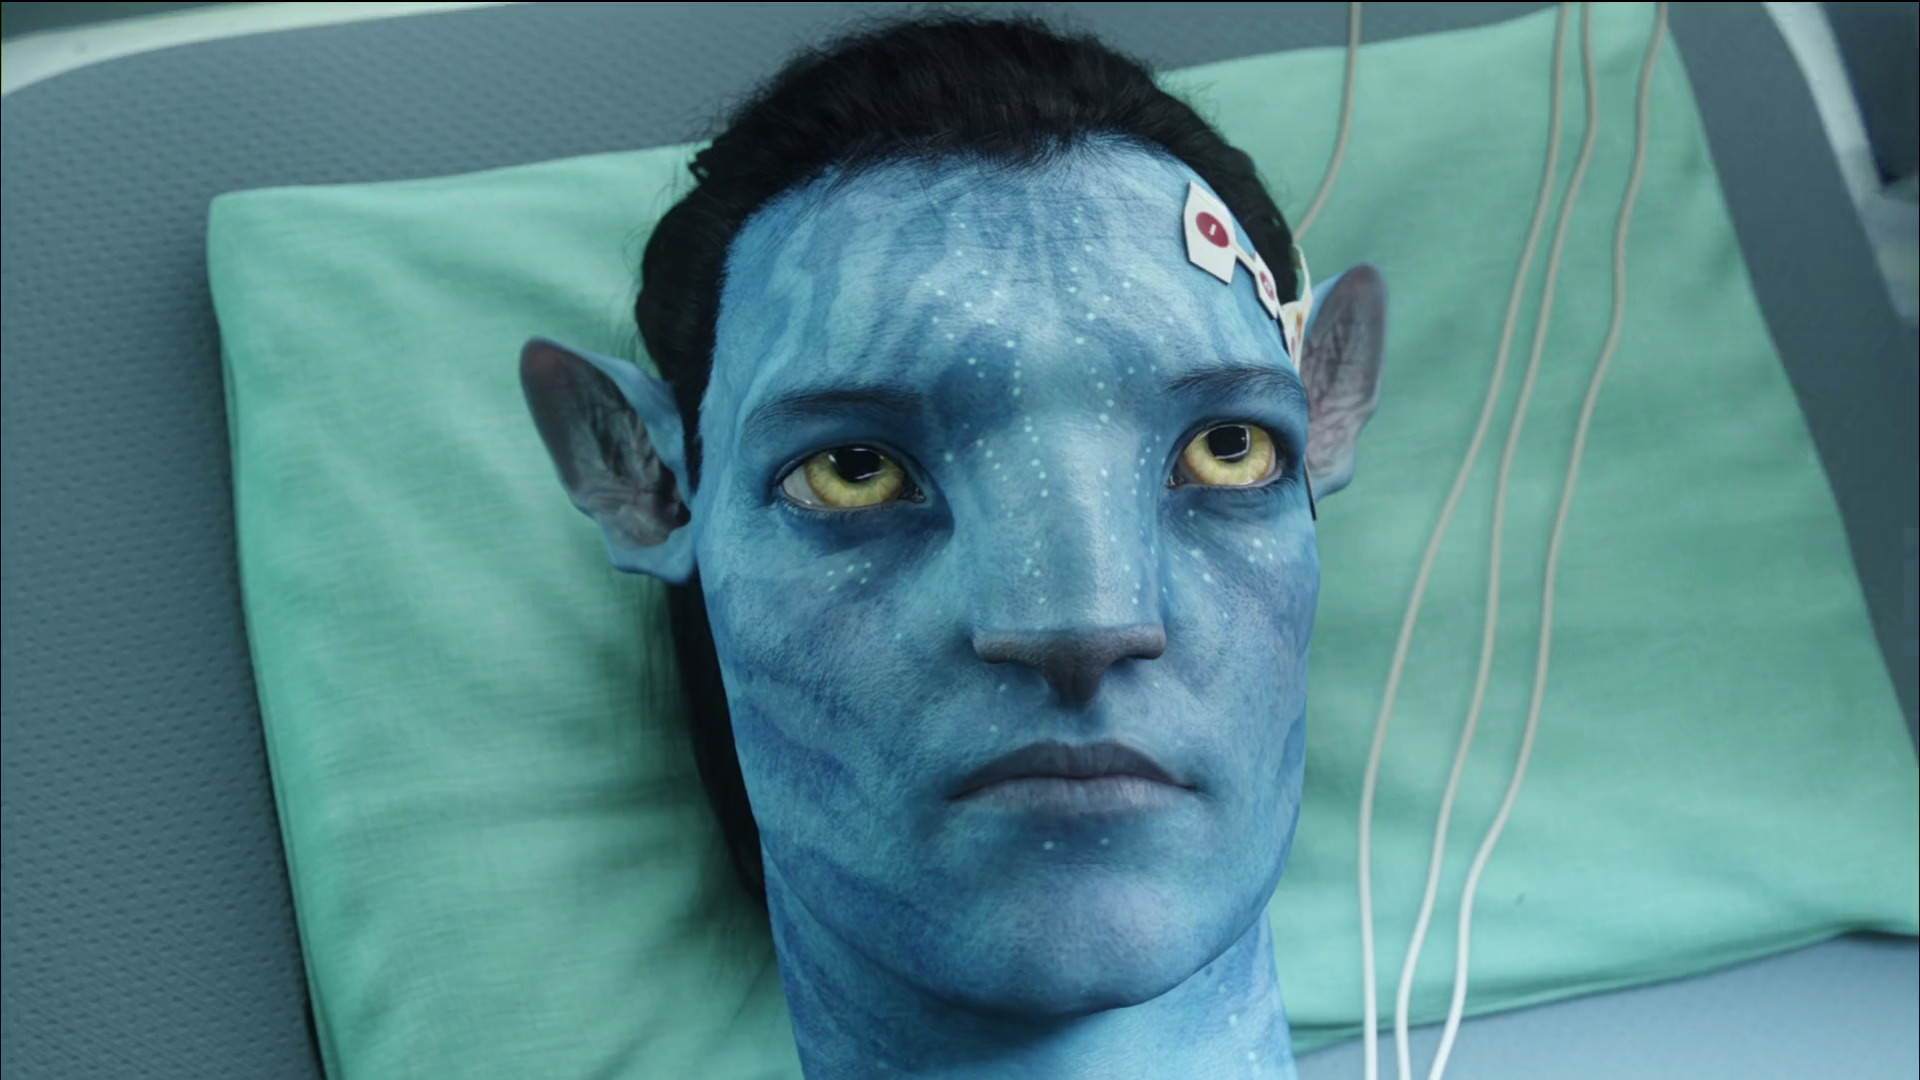 avatar full hd tamil dubbed movie download